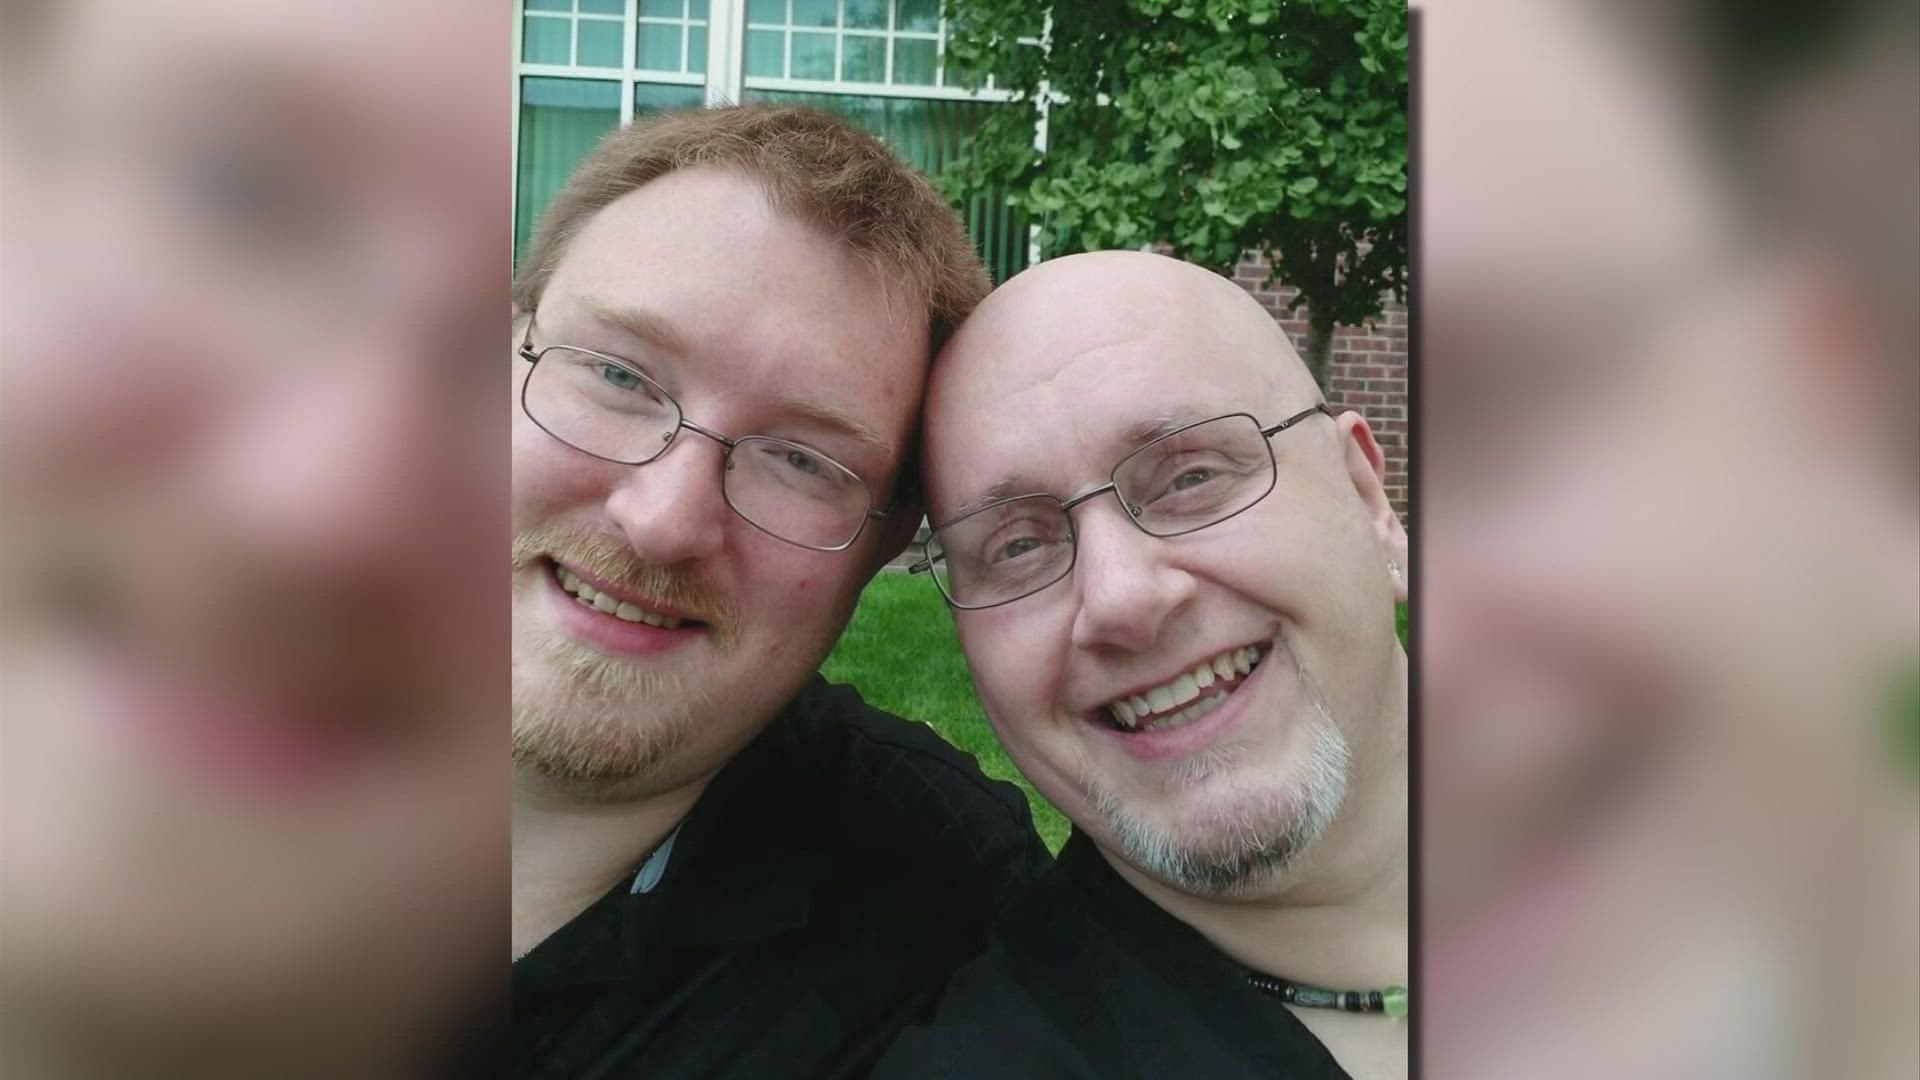 Paul Saltz and Aaron Ackerman are grateful to win a free wedding from Mozart's Cafe in Columbus, saying the pandemic took a big hit out of their nest egg.